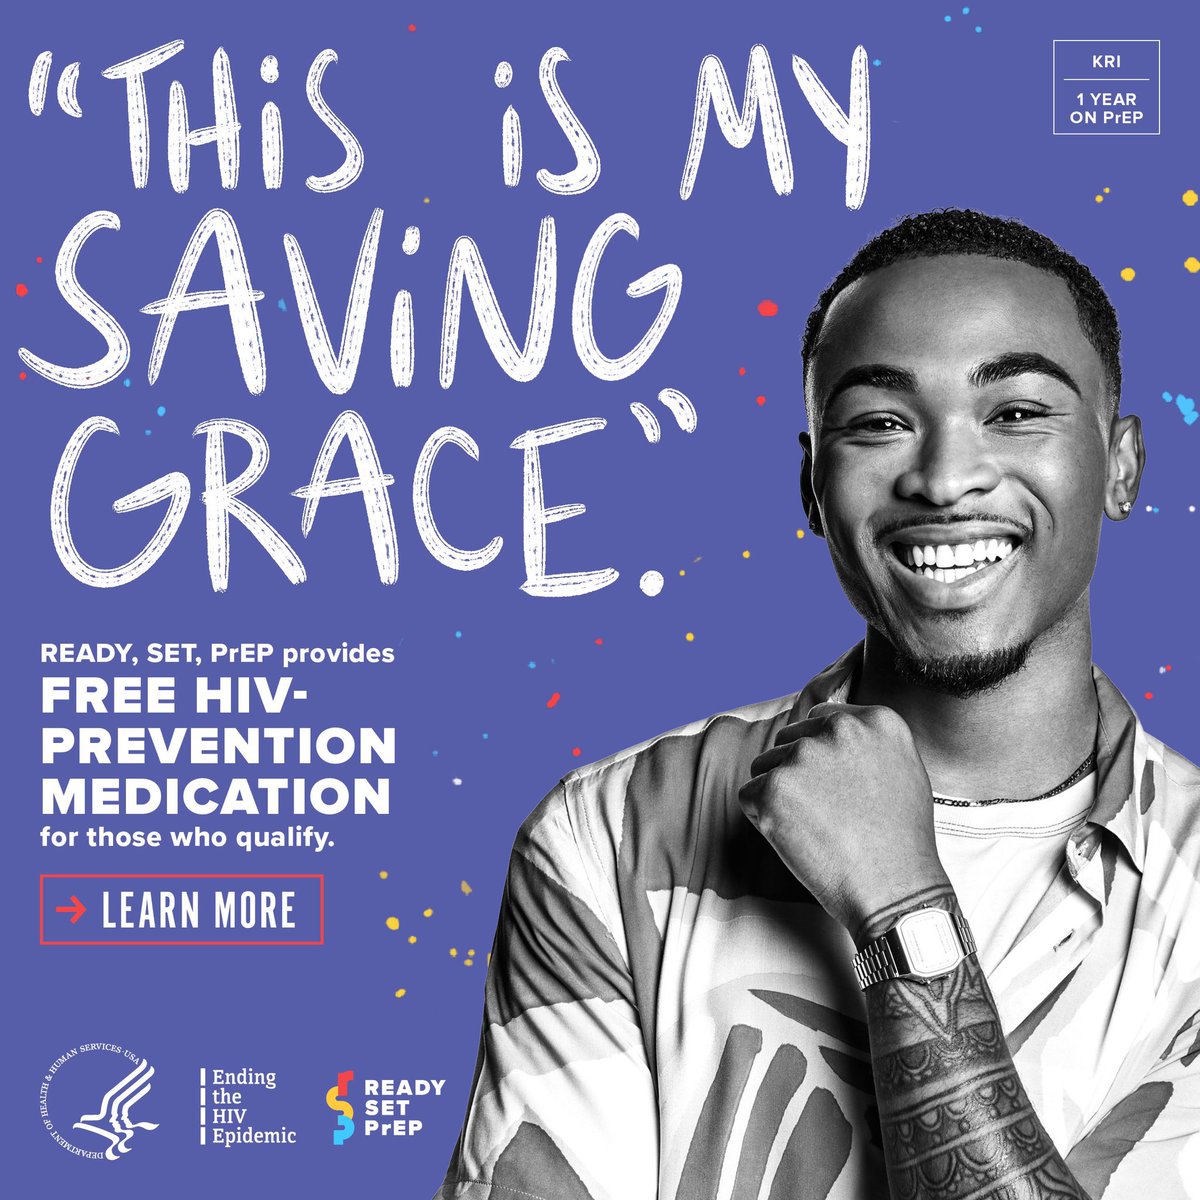 I’ve had family impacted by HIV/AIDS. I want to lead by example and show my community that PrEP is out there to help prevent them from experiencing heartbreak like I’ve experienced from losing my friends. Visit hiv.gov/prep for more info! #readysetprep #NBHAAD @HIVGov